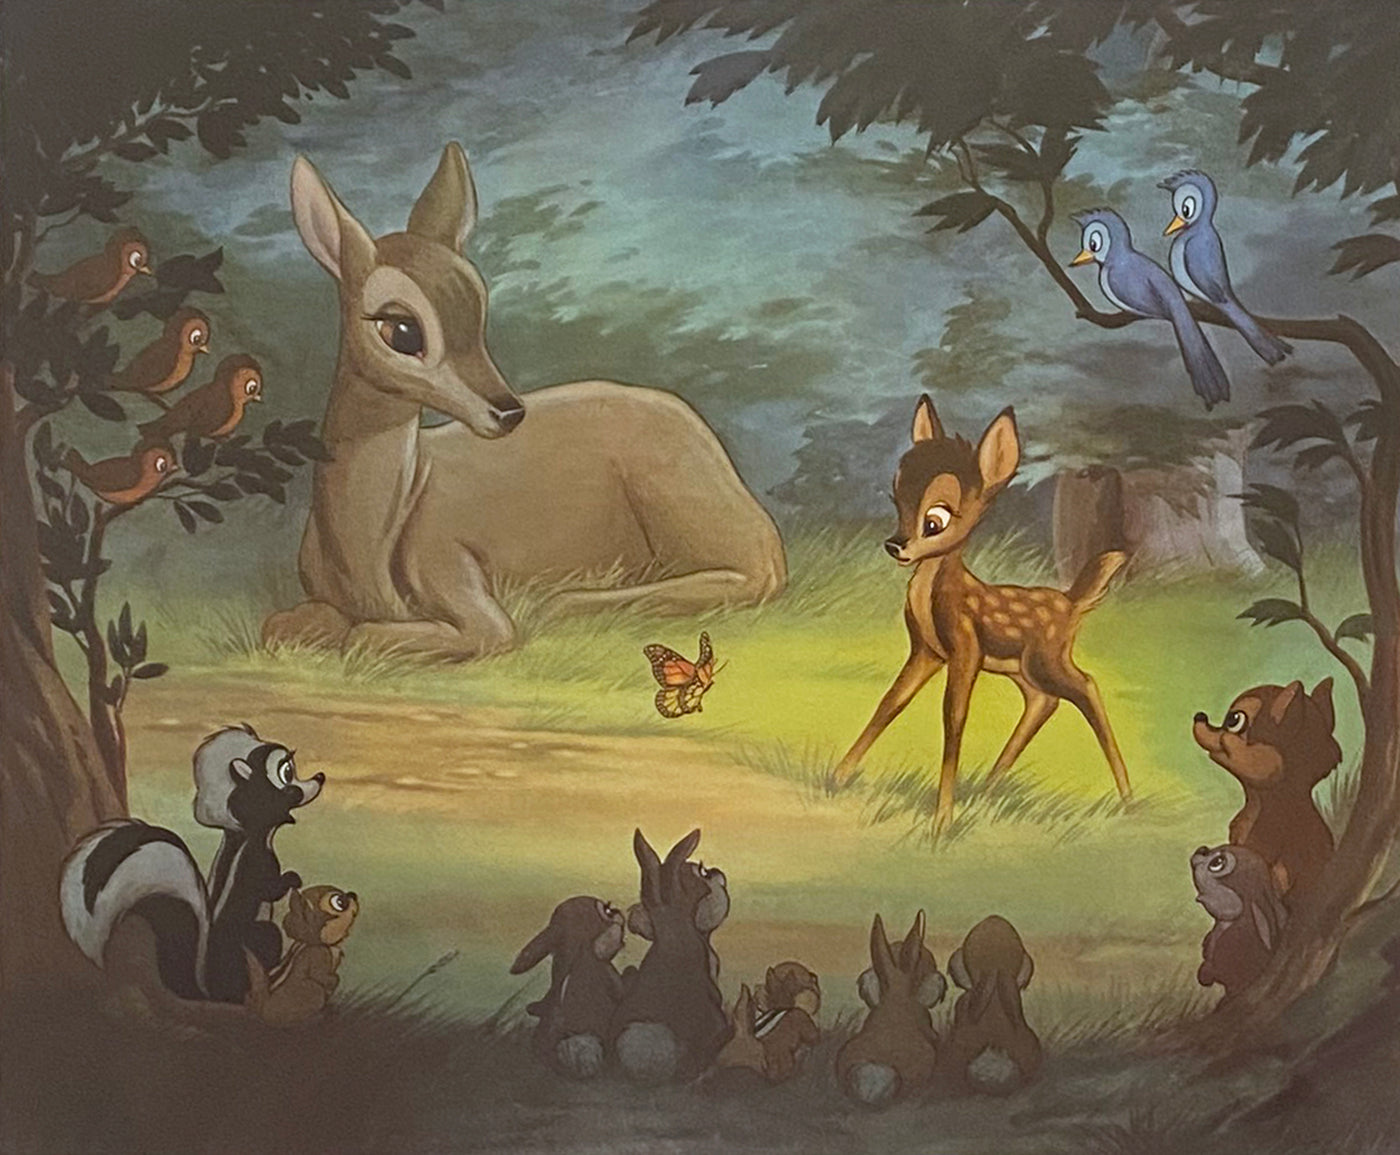 Original Walt Disney Lithograph "Bambi Meets His Forest Friends" signed by Frank Thomas and Ollie Johnston